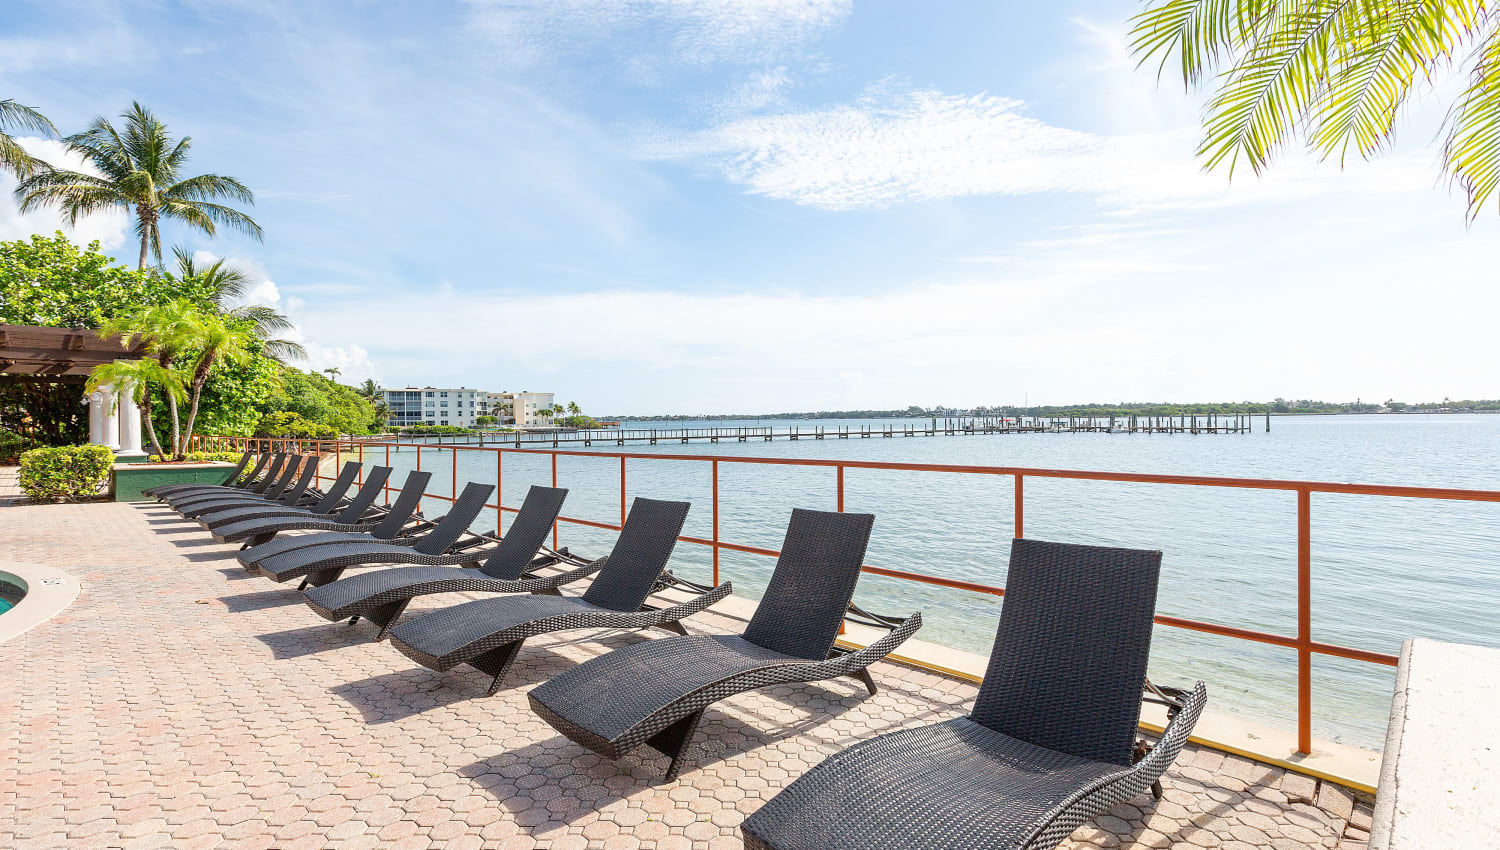 Waterfront seating by the pool at Manatee Bay Apartments in Boynton Beach, Florida